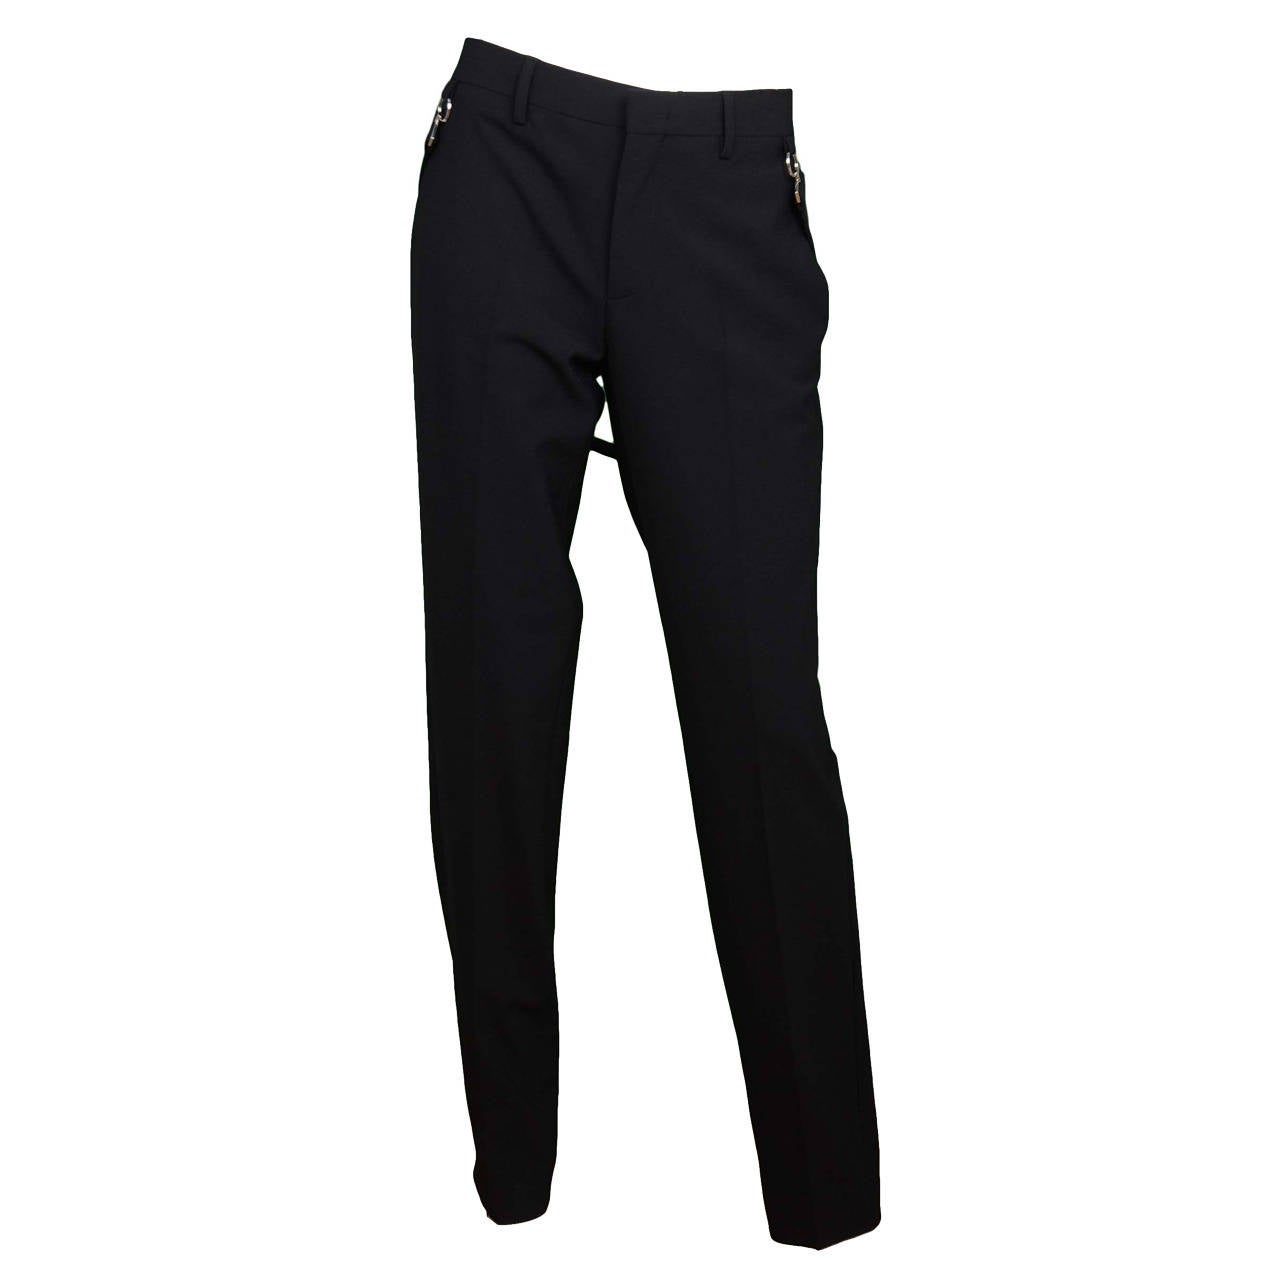 GIVENCHY Black NWT Trousers W/ Belt Detail RT $1250